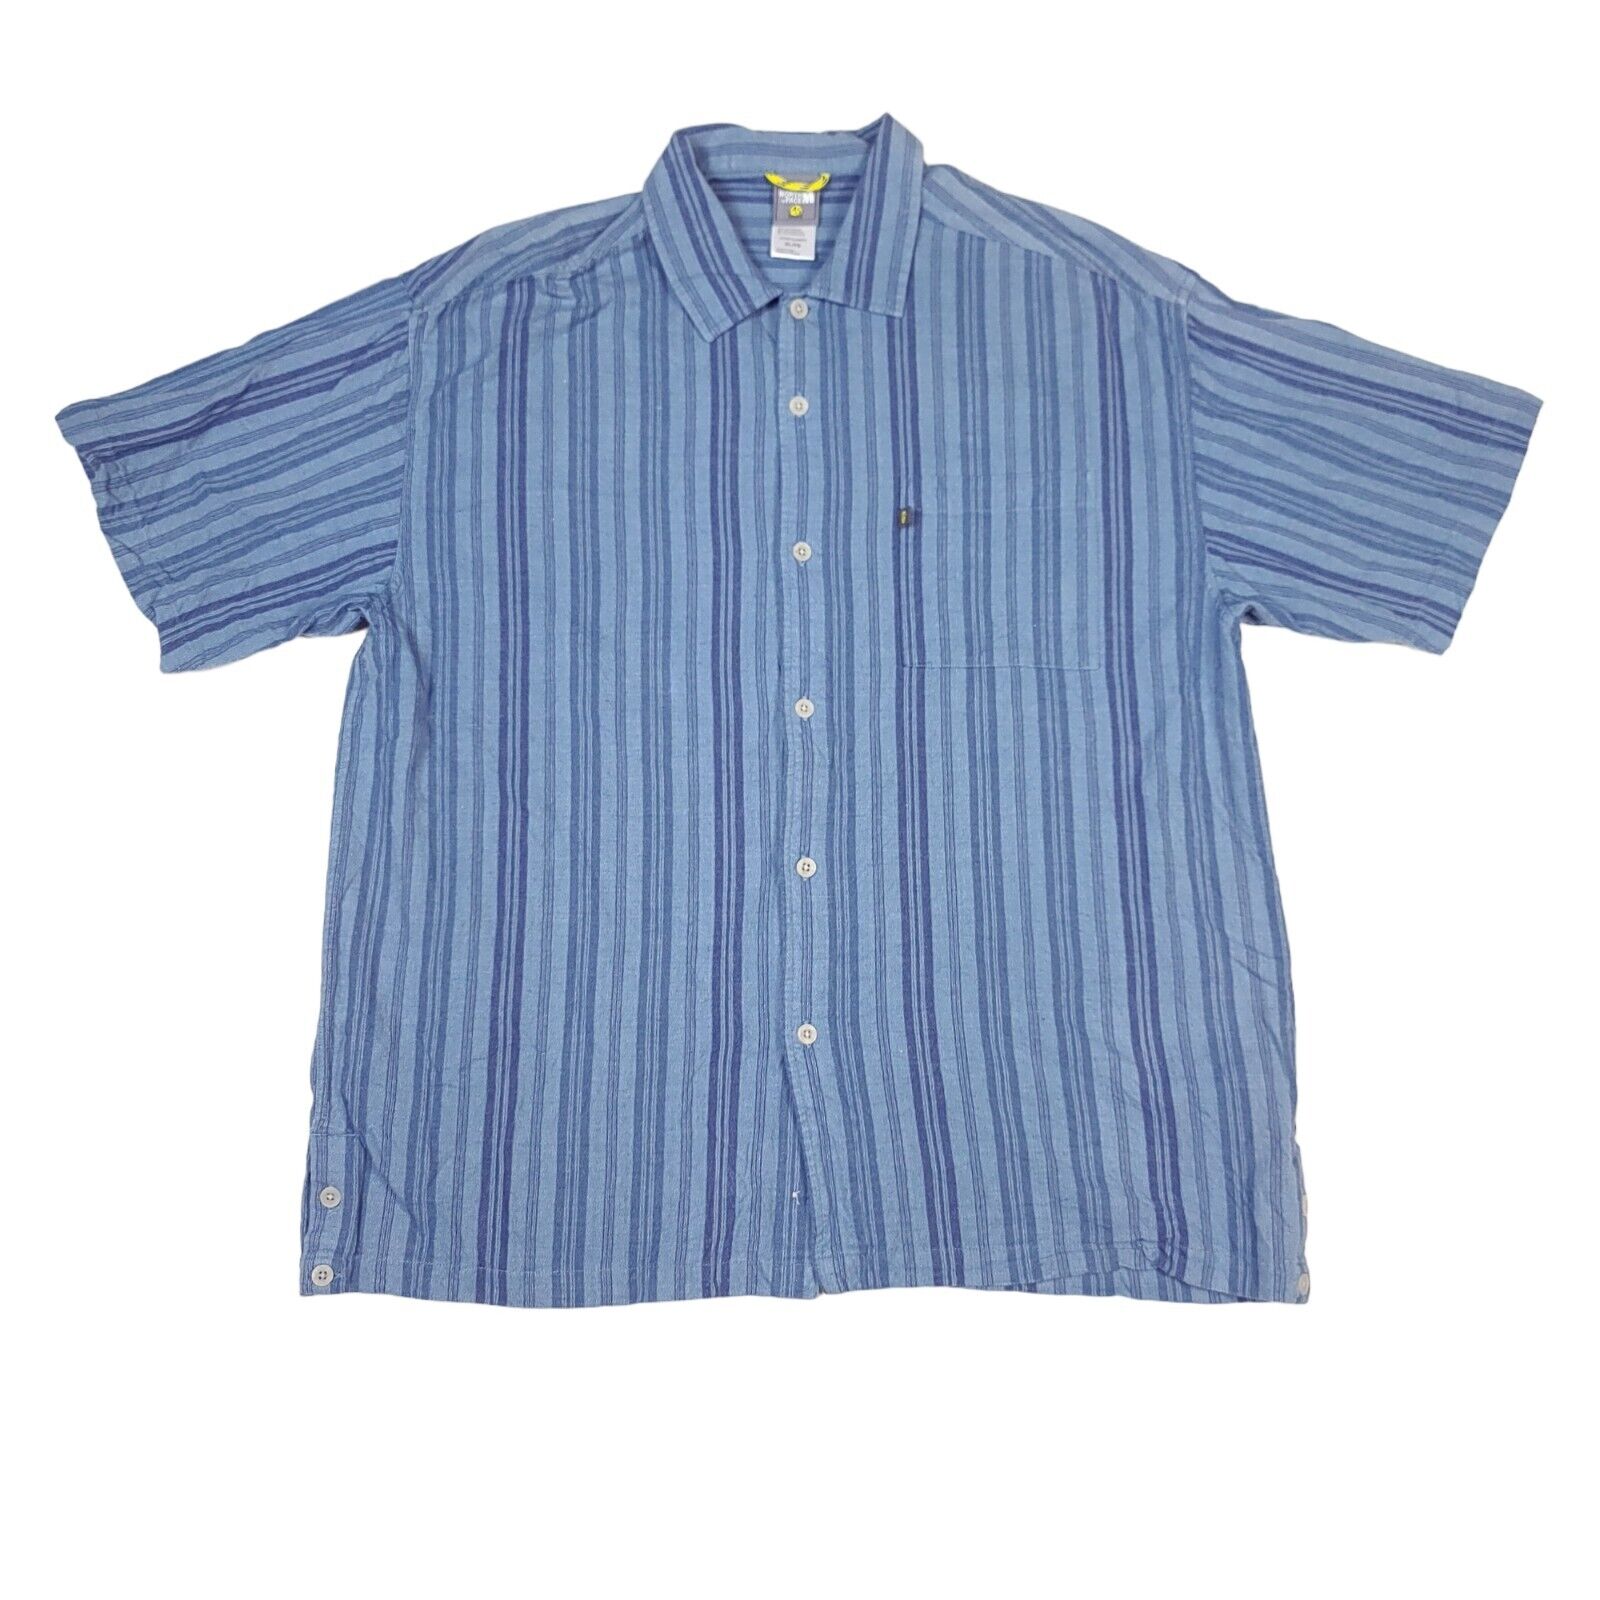 The North Face A5 Blue Striped Button Up Short Sleeve Shirt